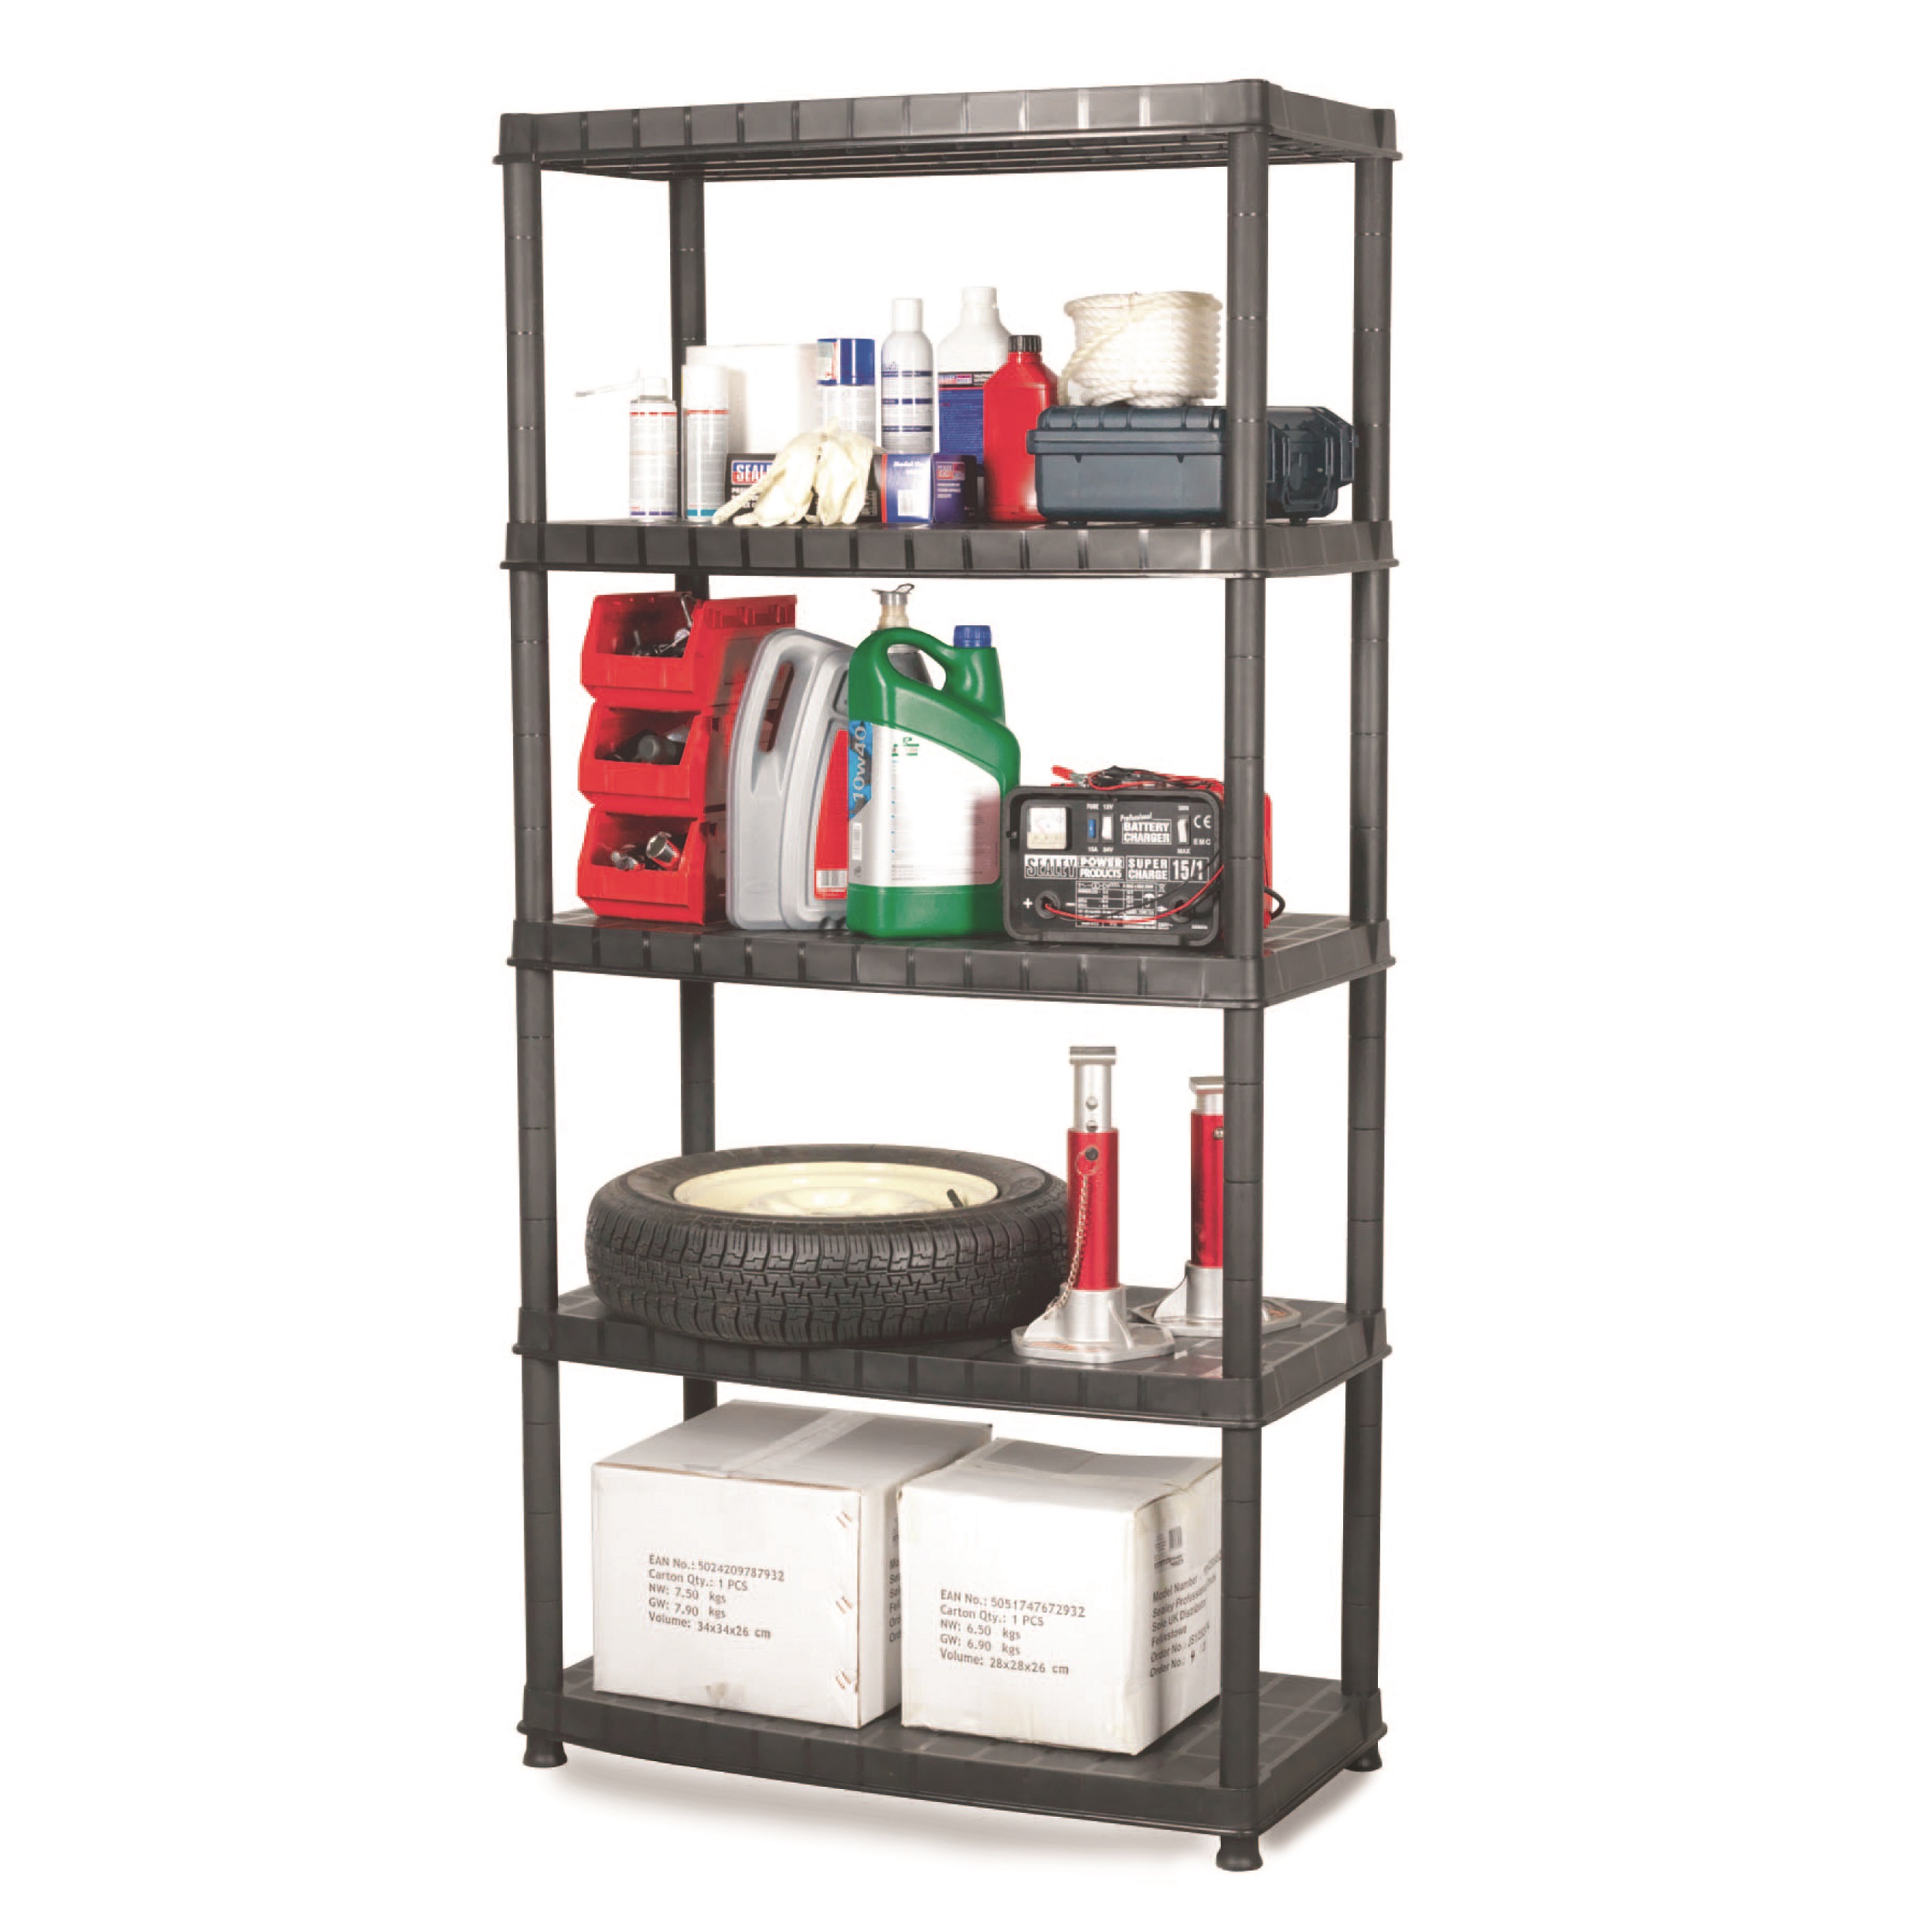 Ram Quality Products Optimo 16 inch 5 Tier Plastic Storage Shelves ...